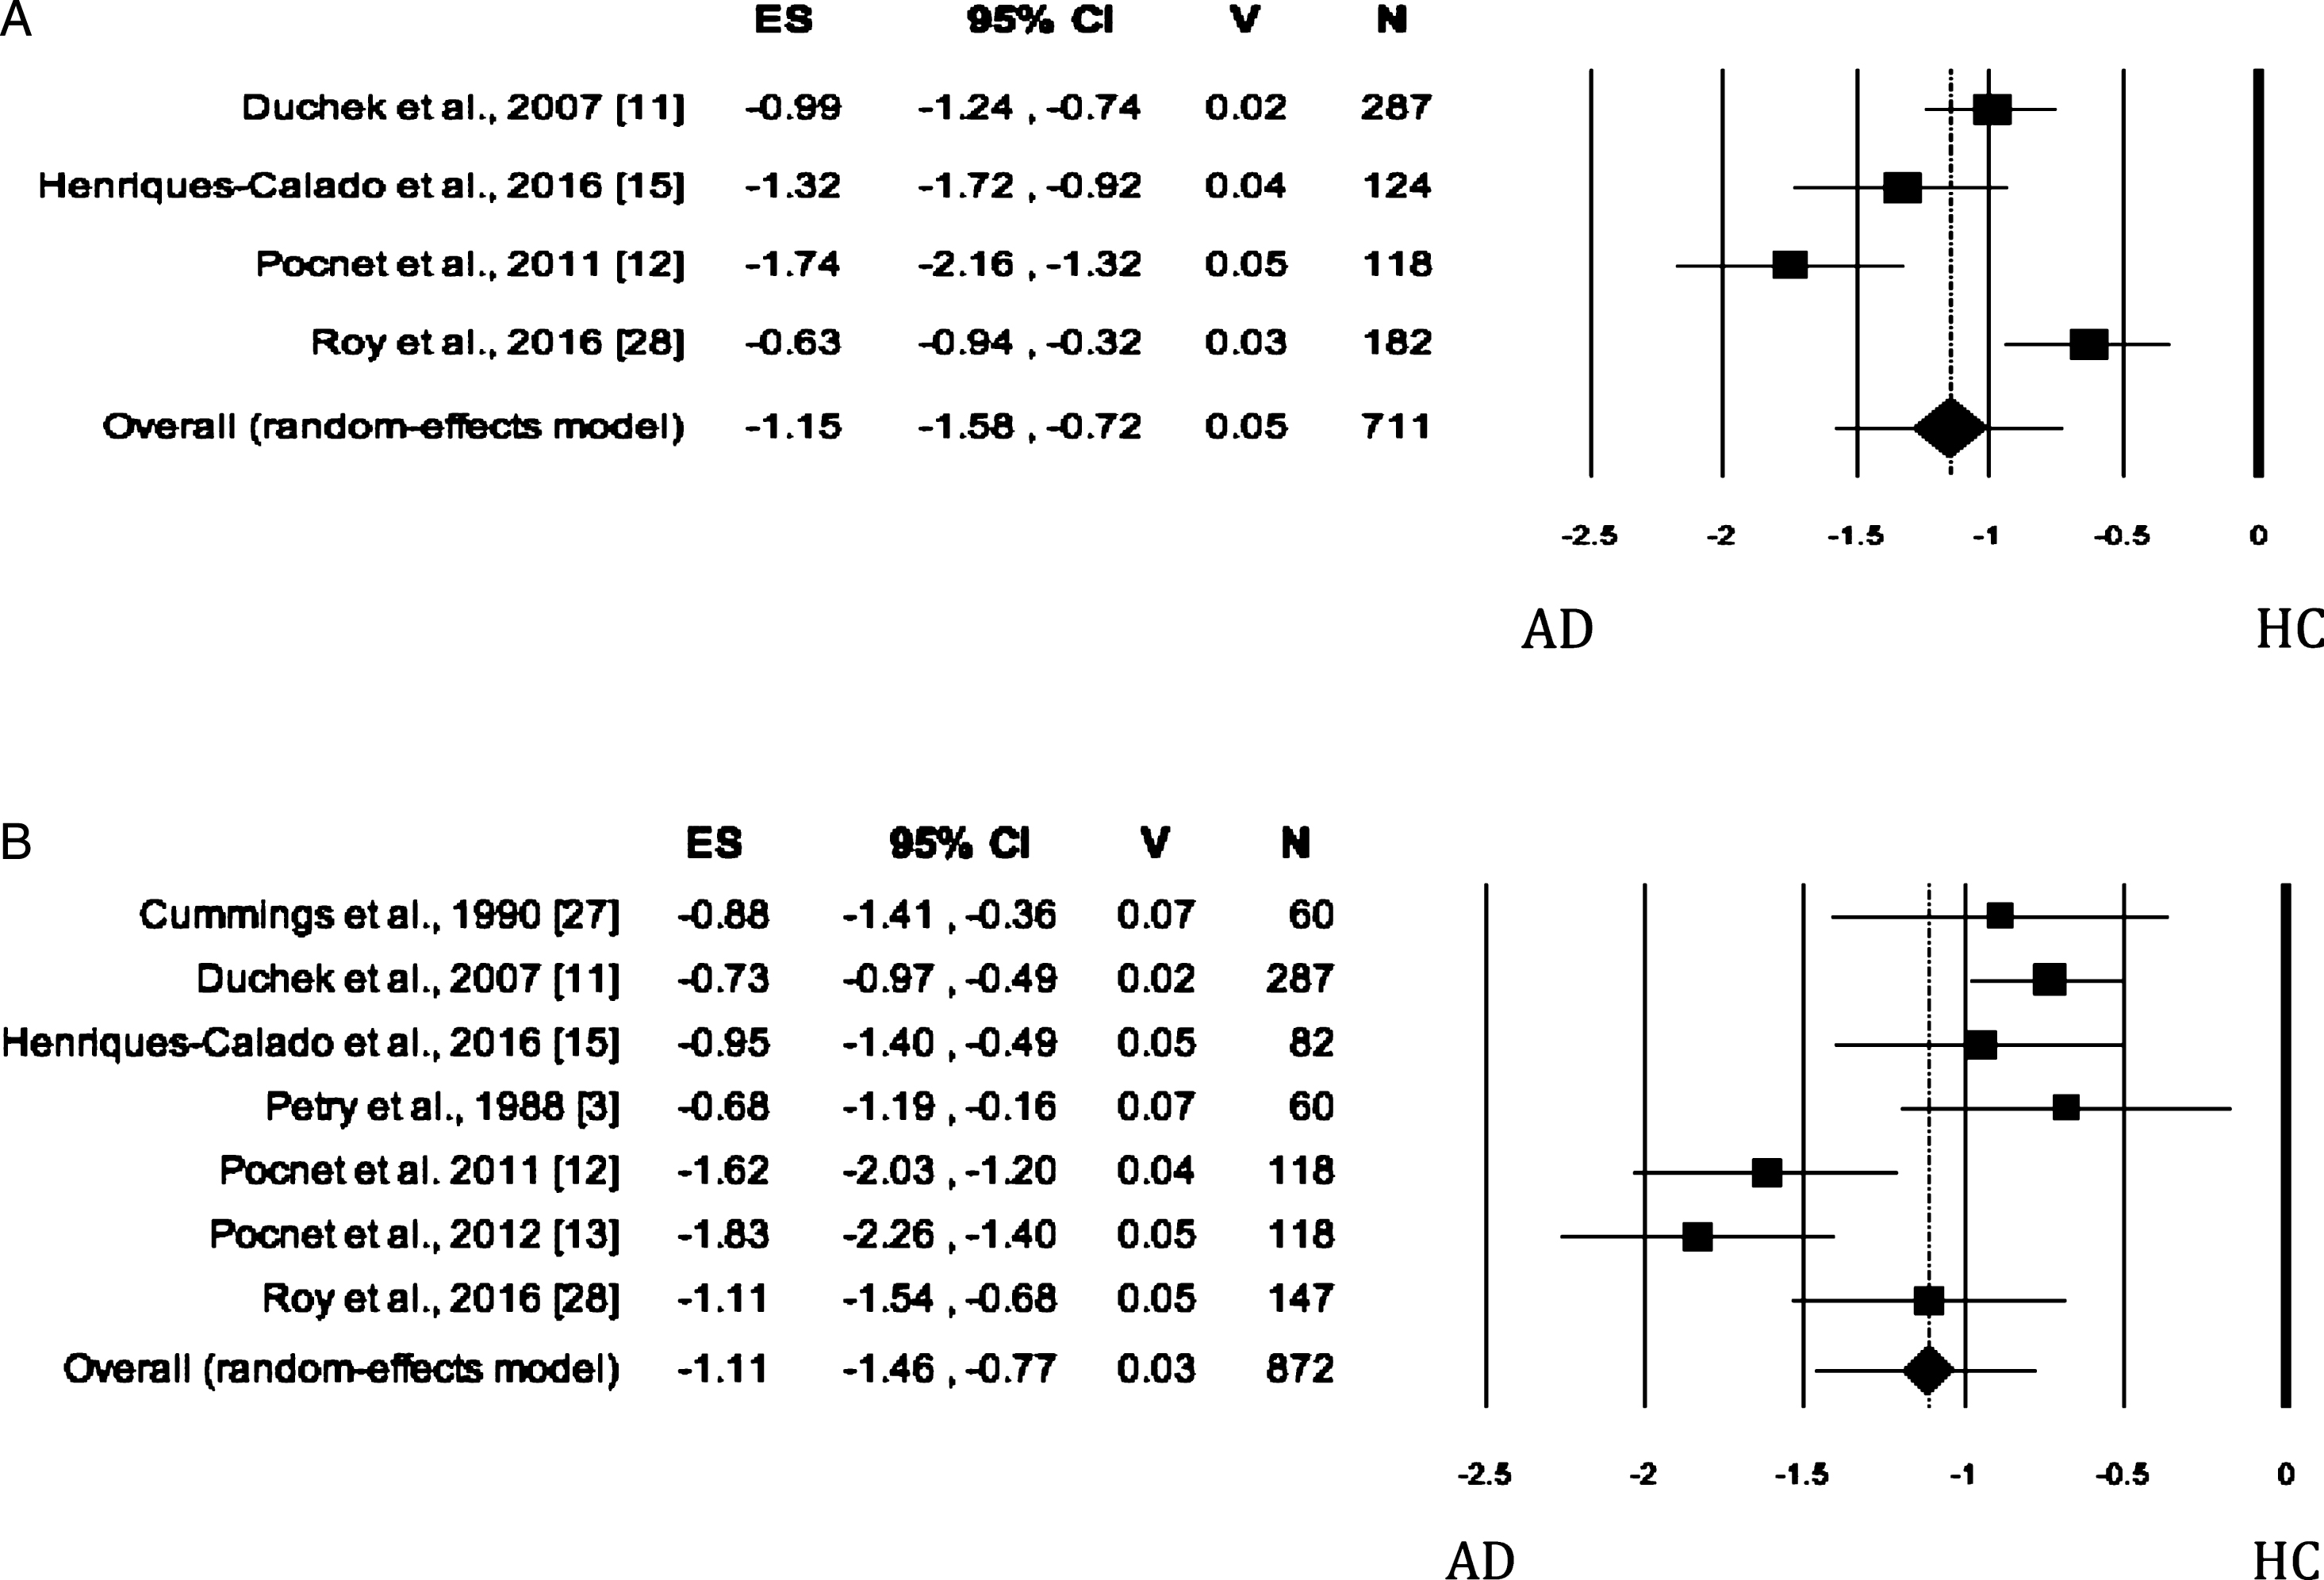 Forest plot for Openness evaluated by self-rated (A) measures and informant-rated (B) measures, displaying effect size (Hedges’ g) calculated using a random effects model. ES, effect size; CI, confidence intervals; V, variance; N, total number of participants; AD, Alzheimer’s disease; HC, healthy subjects.